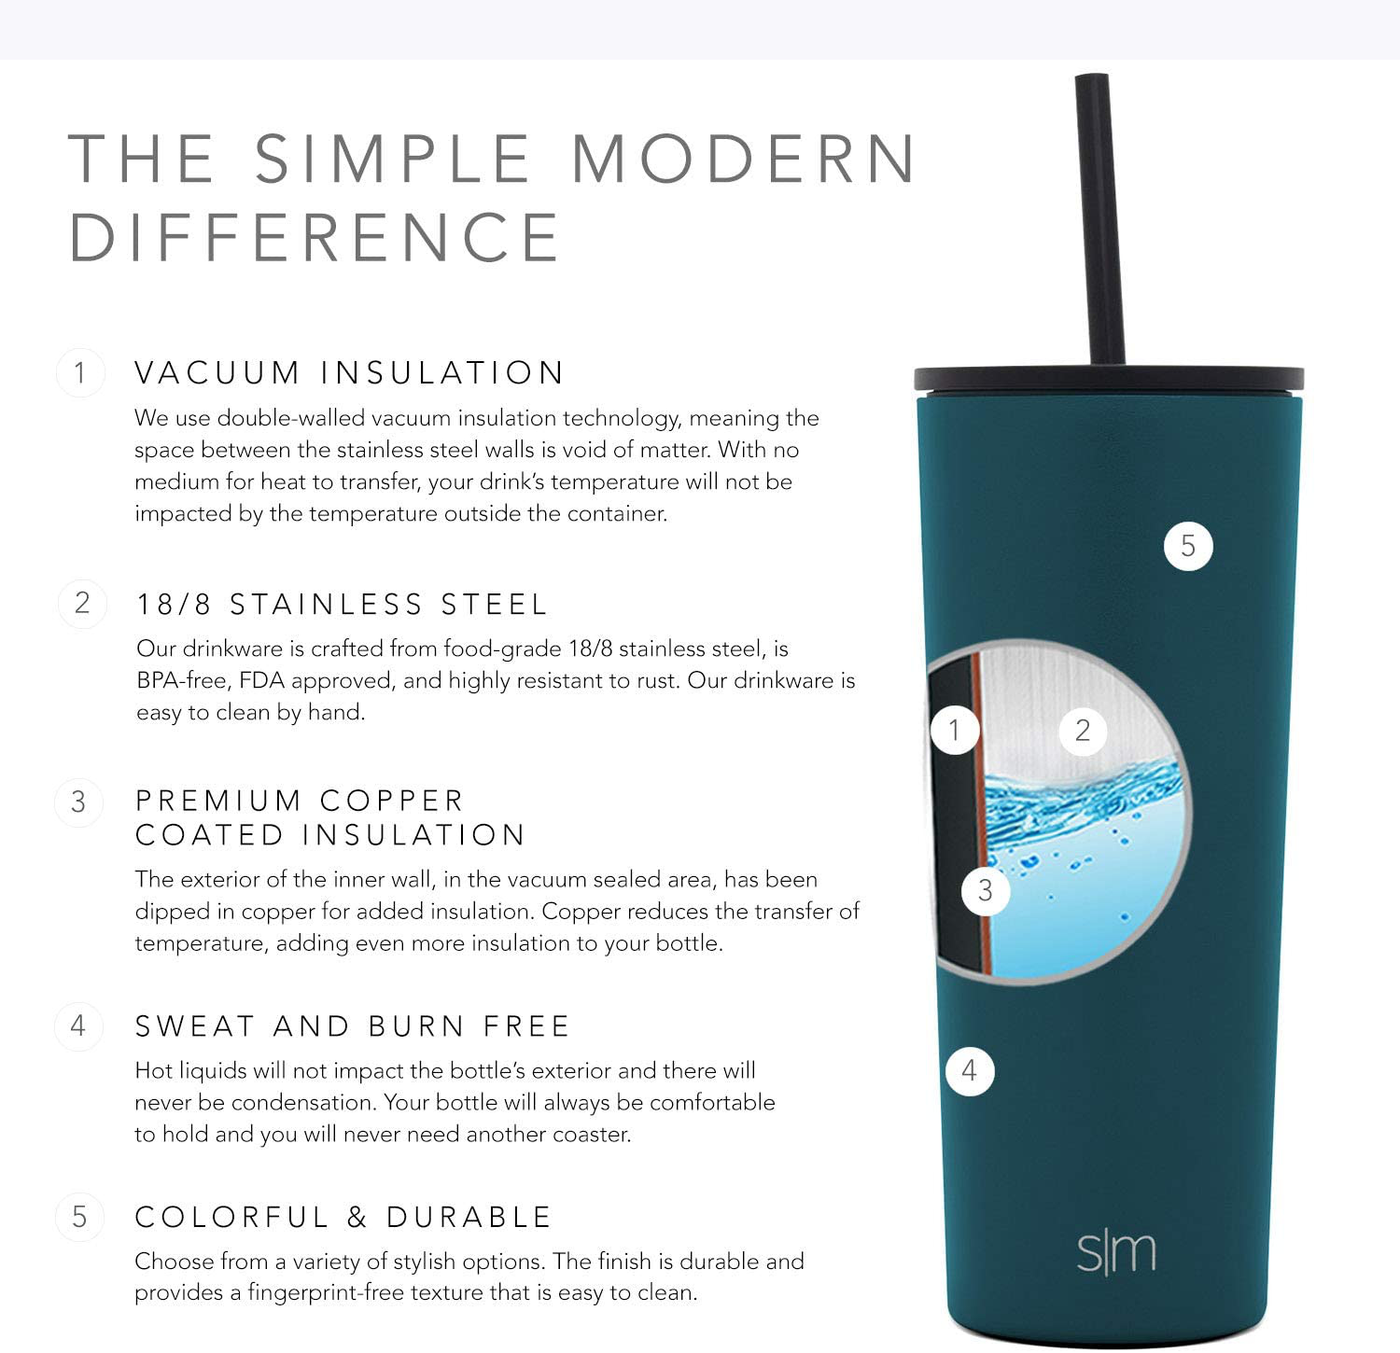 Simple Modern Classic Insulated Tumbler with Straw and Flip Lid - Stainless Steel Water Bottle Iced Coffee Travel Mug Cup 20oz (590ml) - Midnight Black